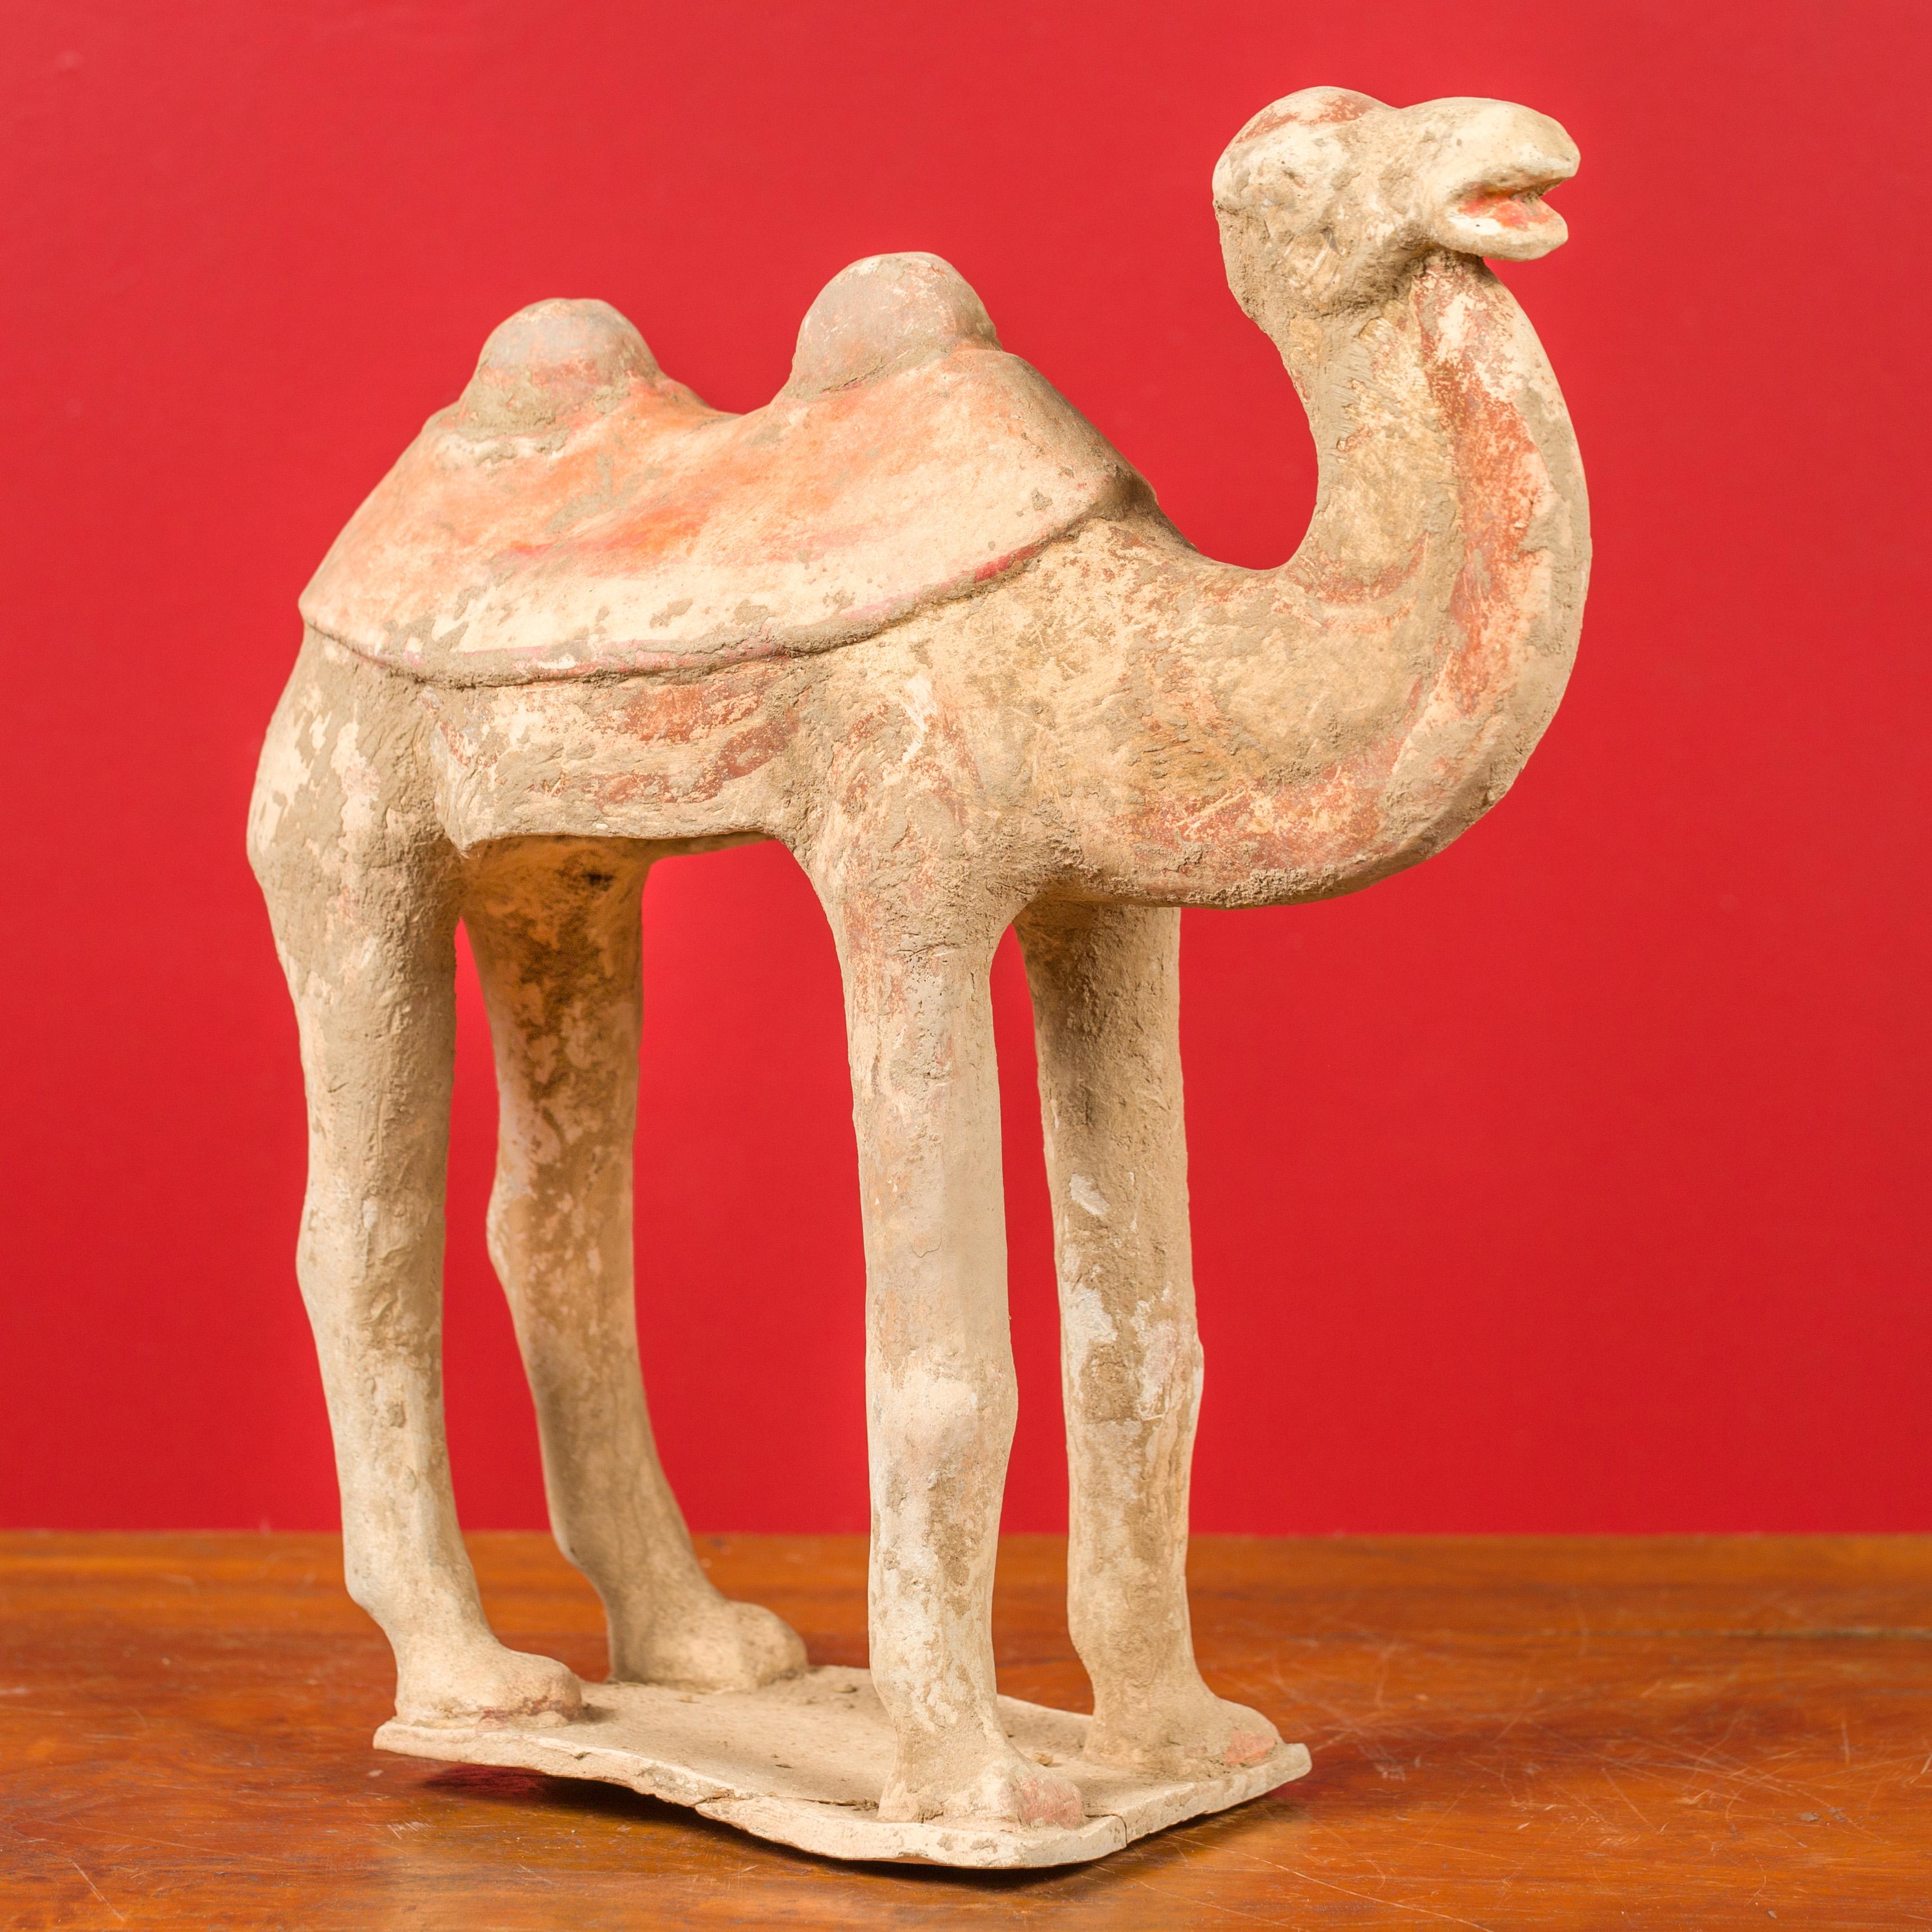 A Chinese Han Dynasty period mingqi terracotta camel circa 202 BC-200 AD, with traces of original polychromy. Created in China during the Han Dynasty, this mingqi, a funerary statue created to be buried with the deceased to secure an enjoyable